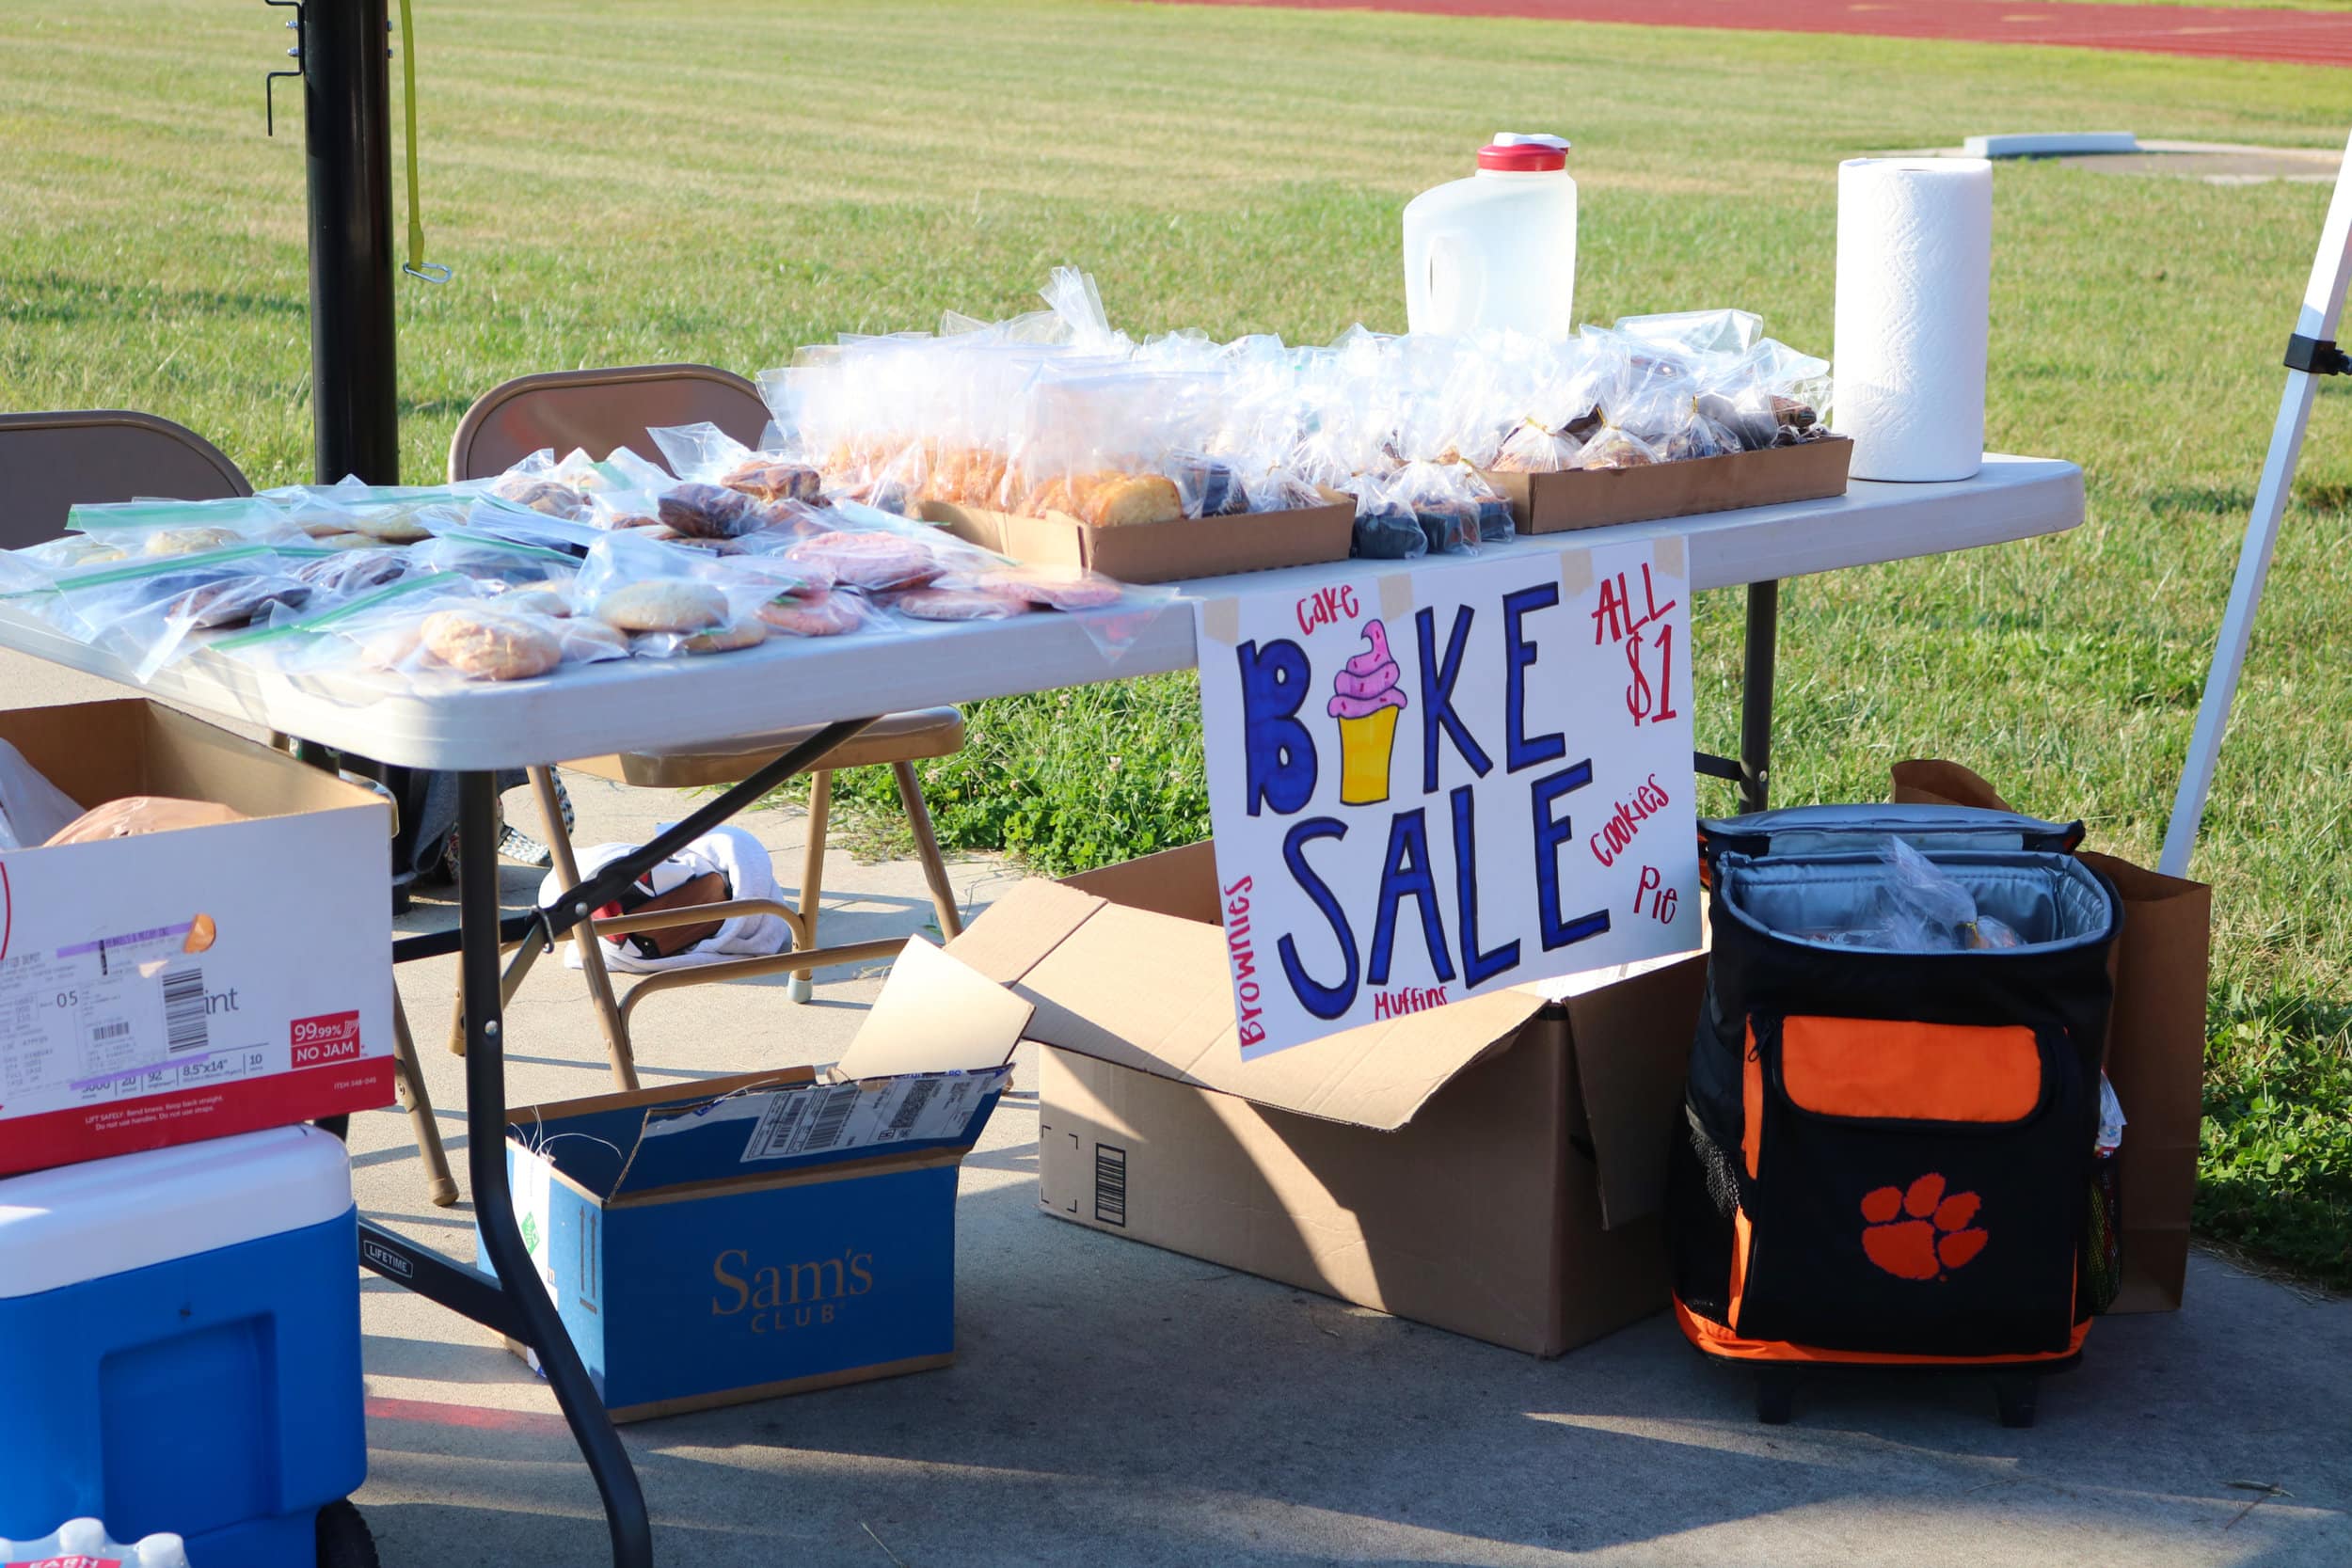 The health science department had a bake sale as well to help raise money.